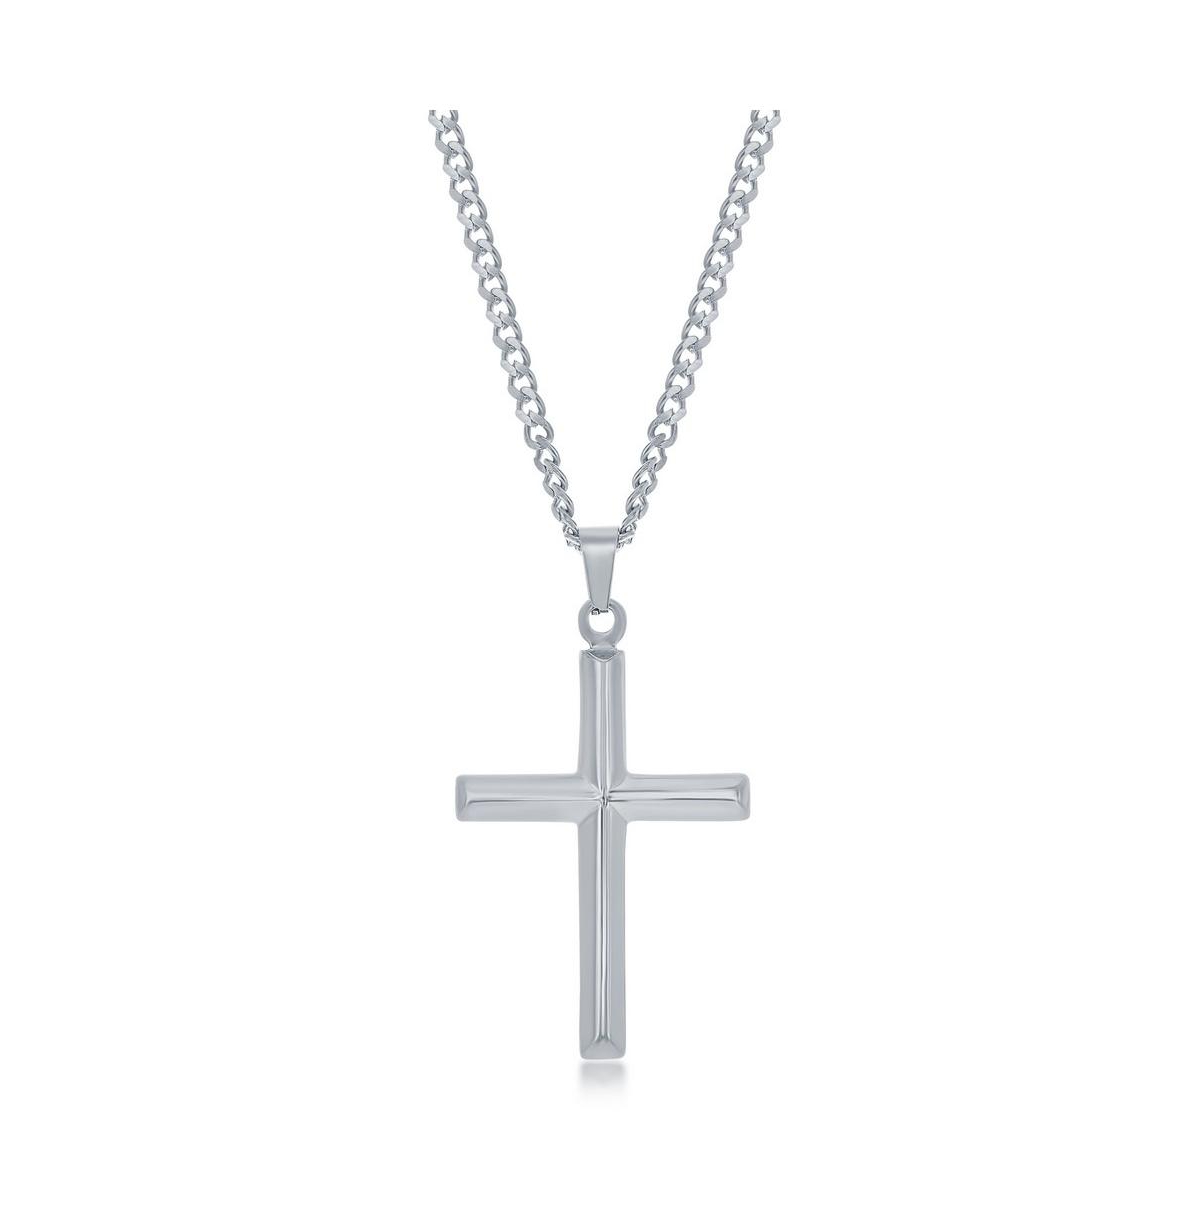 Stainless Steel or Gold Plated over Stainless Steel Polished 3D Cross Necklace - Silver